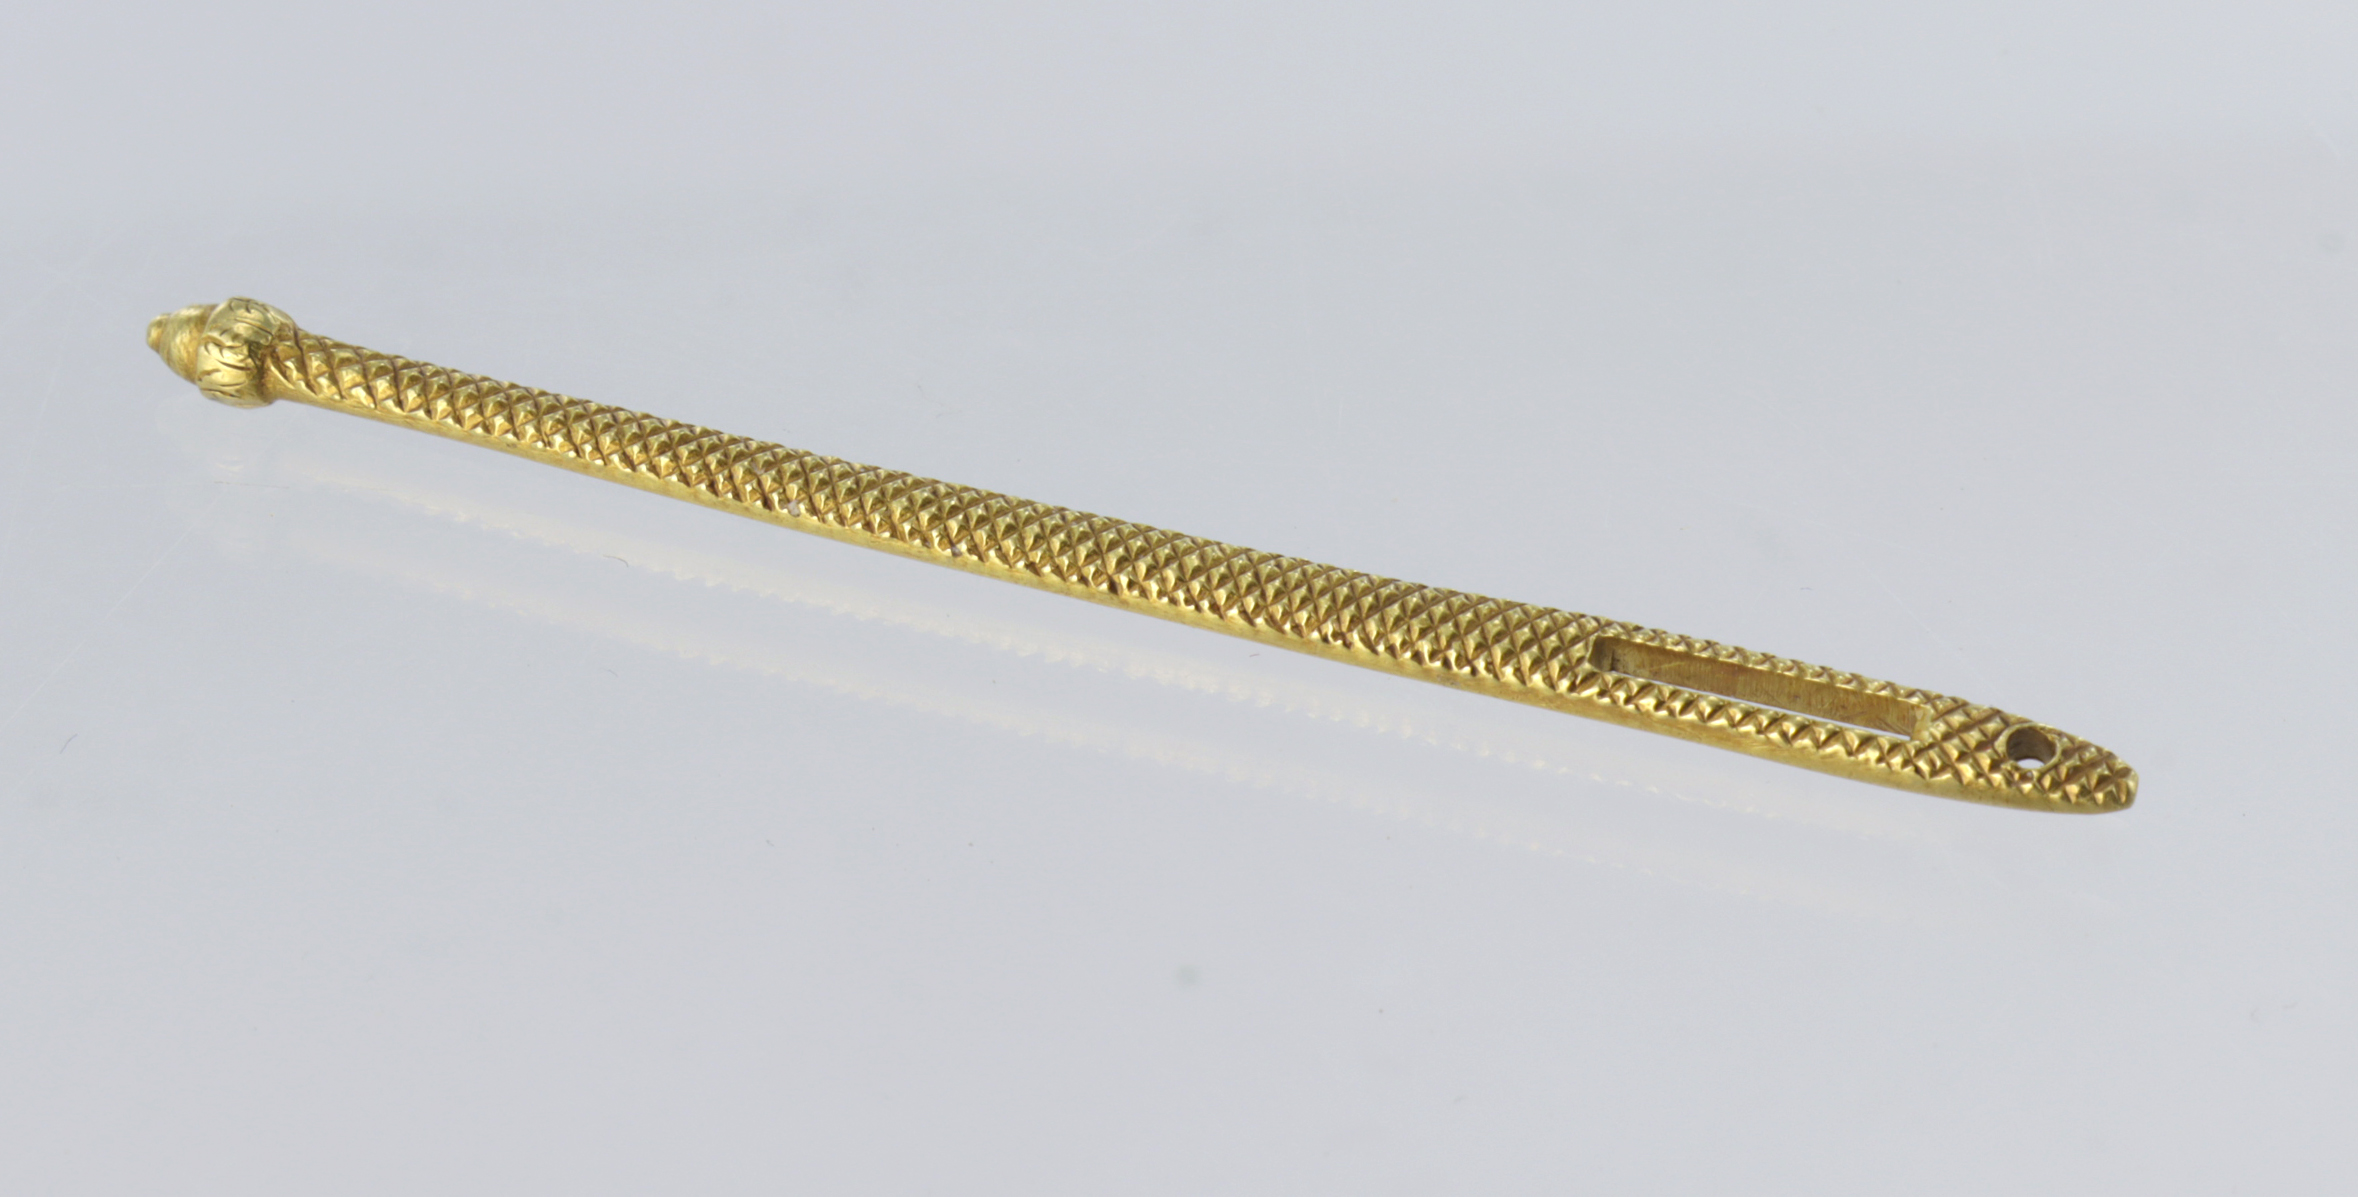 High carat (tests as 23ct) George IV gold needle, approx 57mm in length with inscription "1st